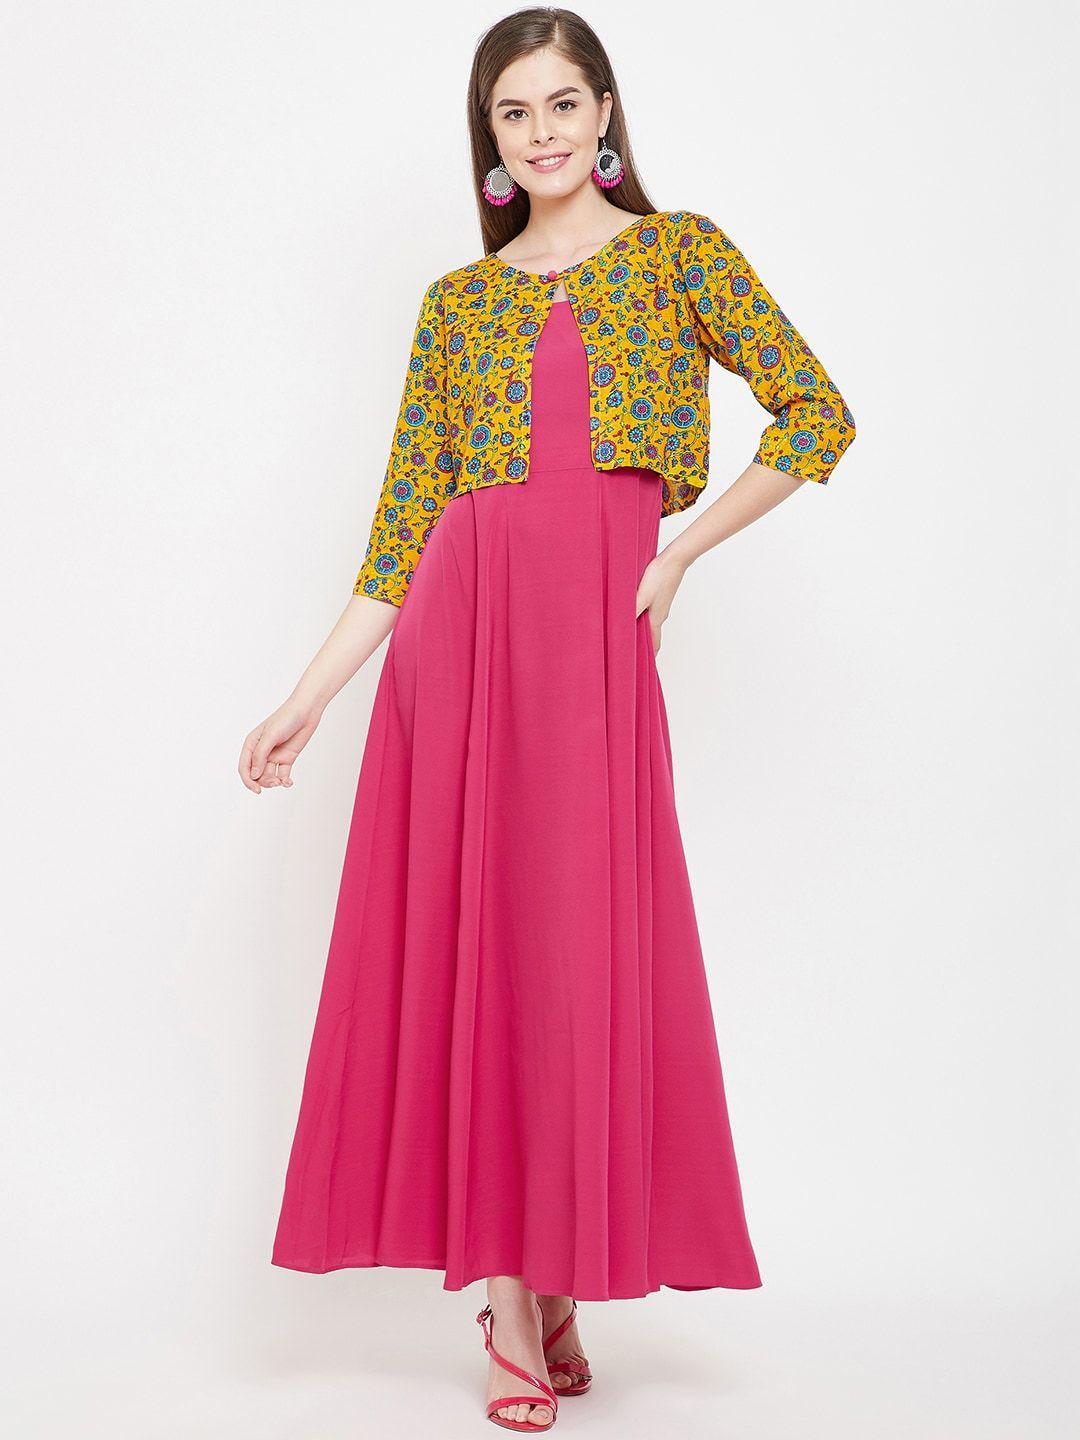 panit yellow & pink ethnic a-line cotton maxi dress with jacket